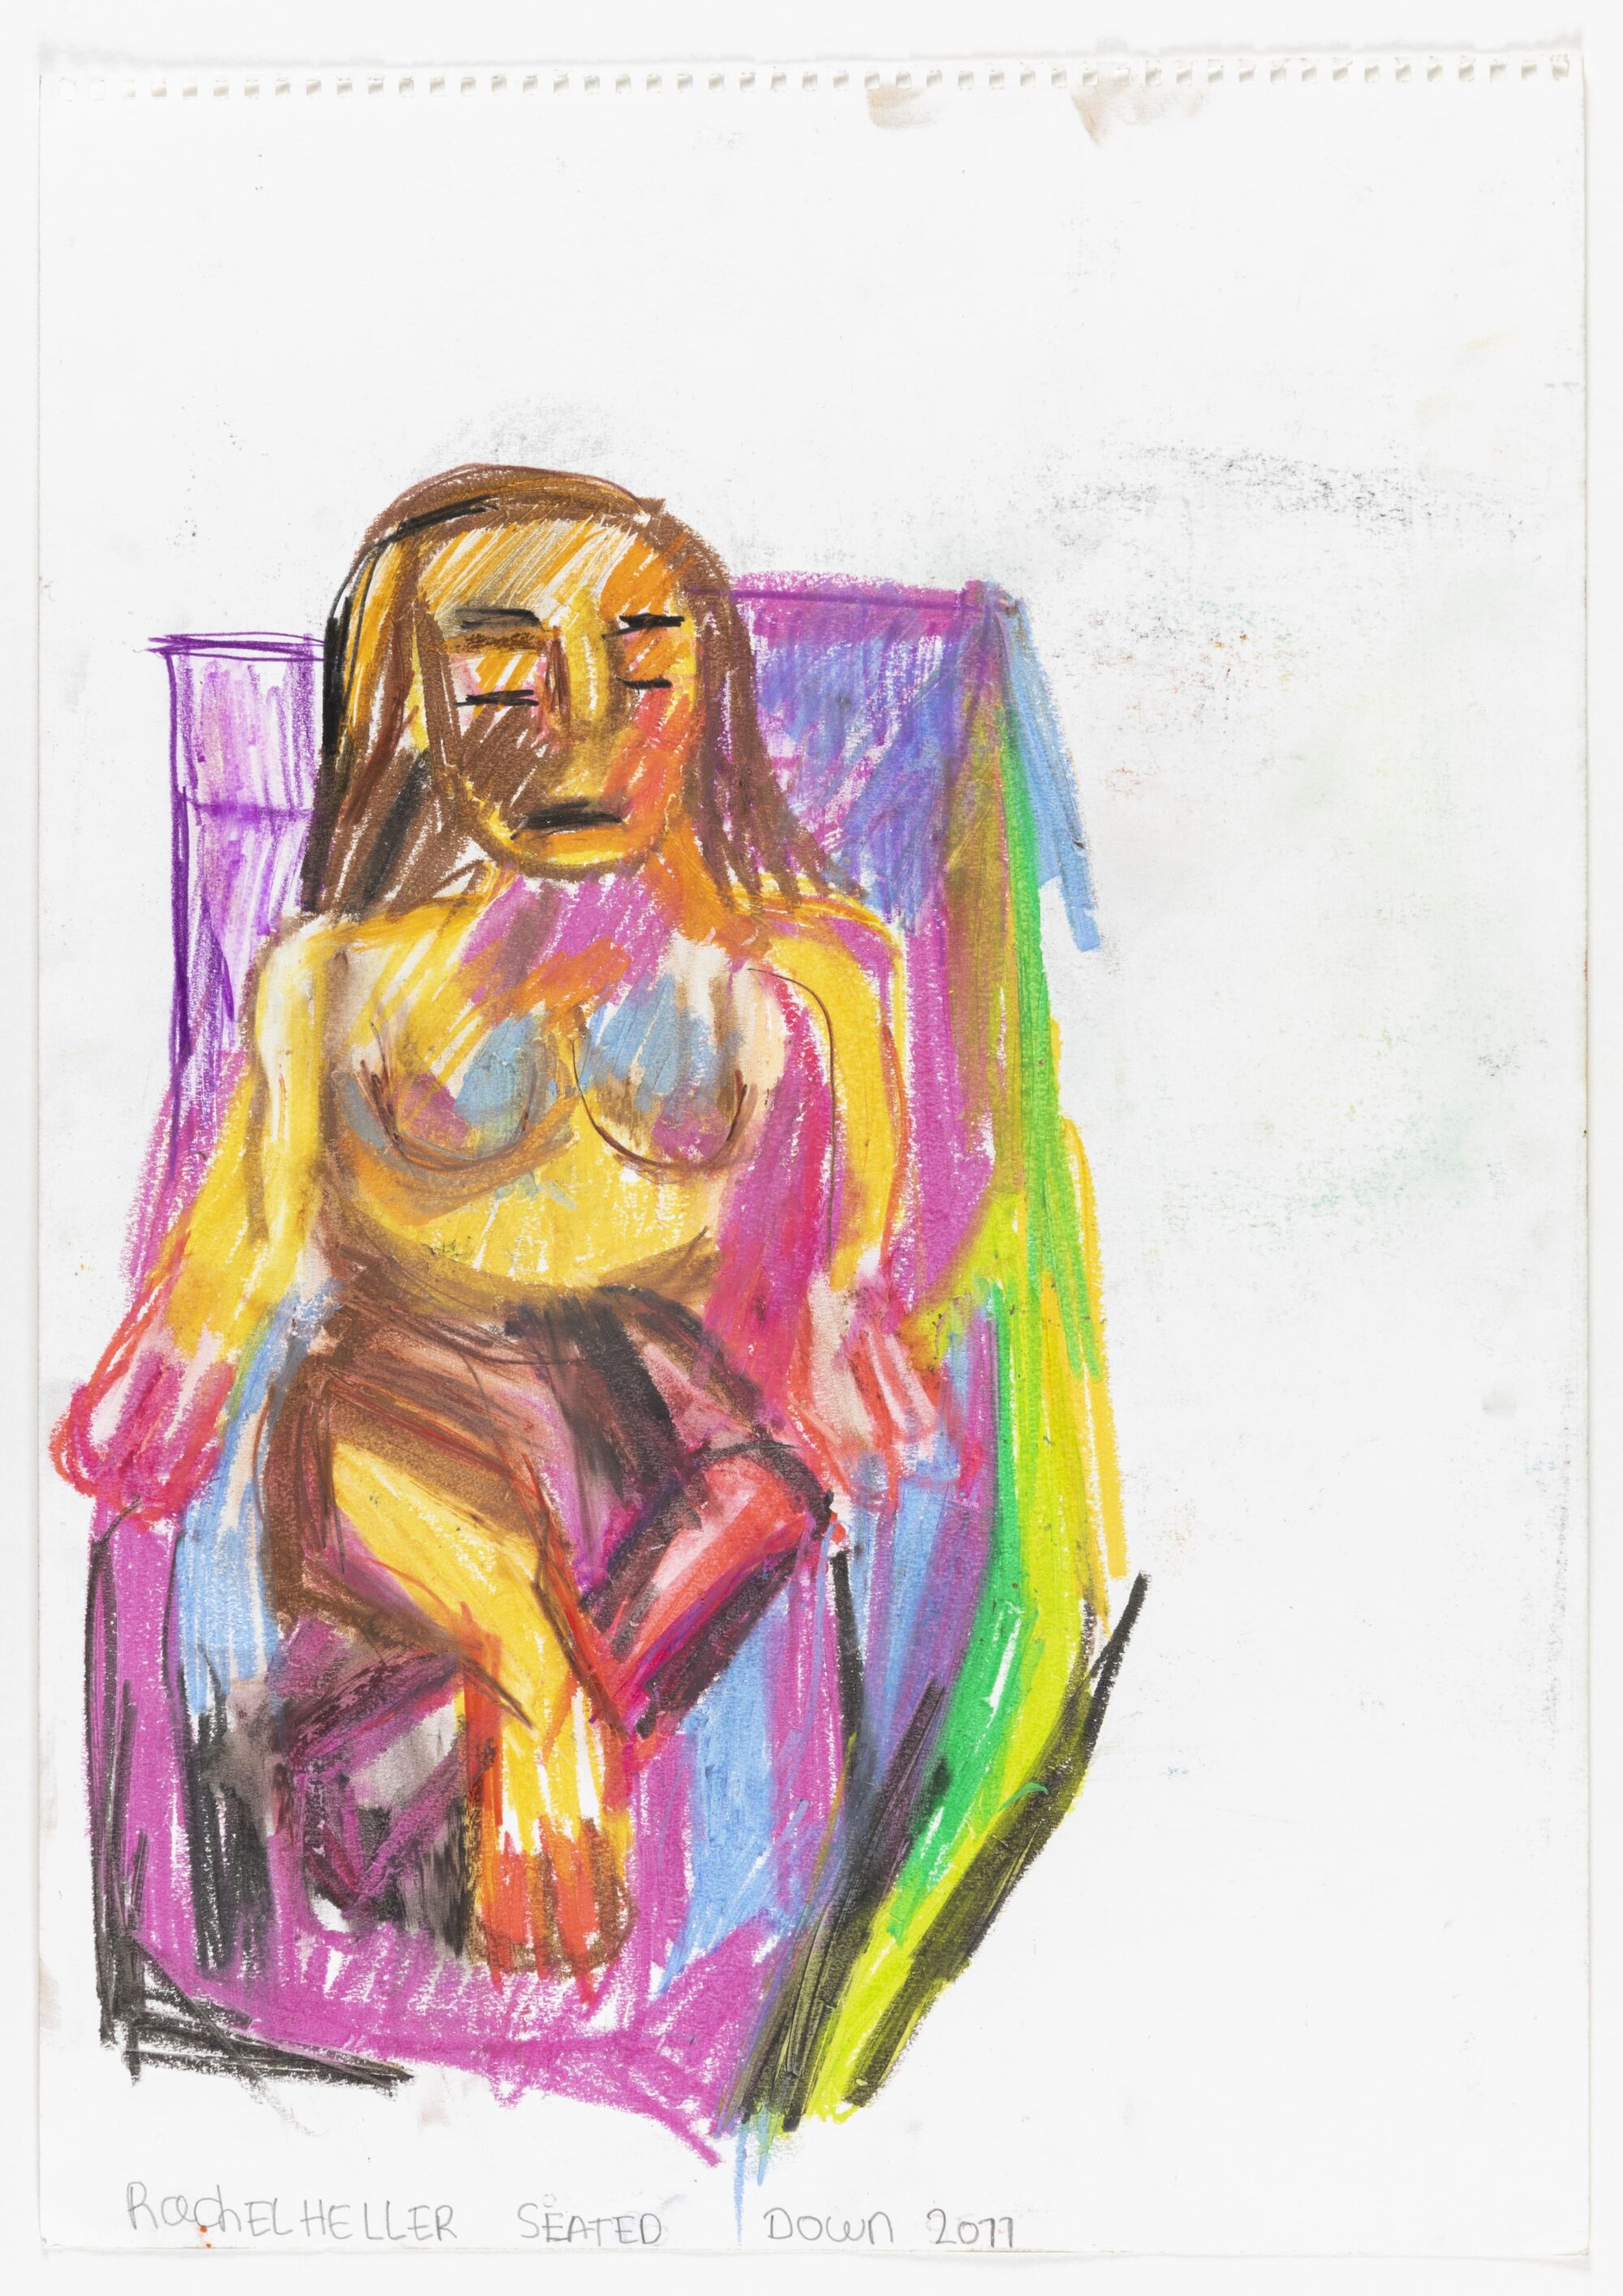 The Wick - Rachel Heller, Seated Down, 2011, crayon on paper, 59 x 42 cm, courtesy of Flowers Gallery